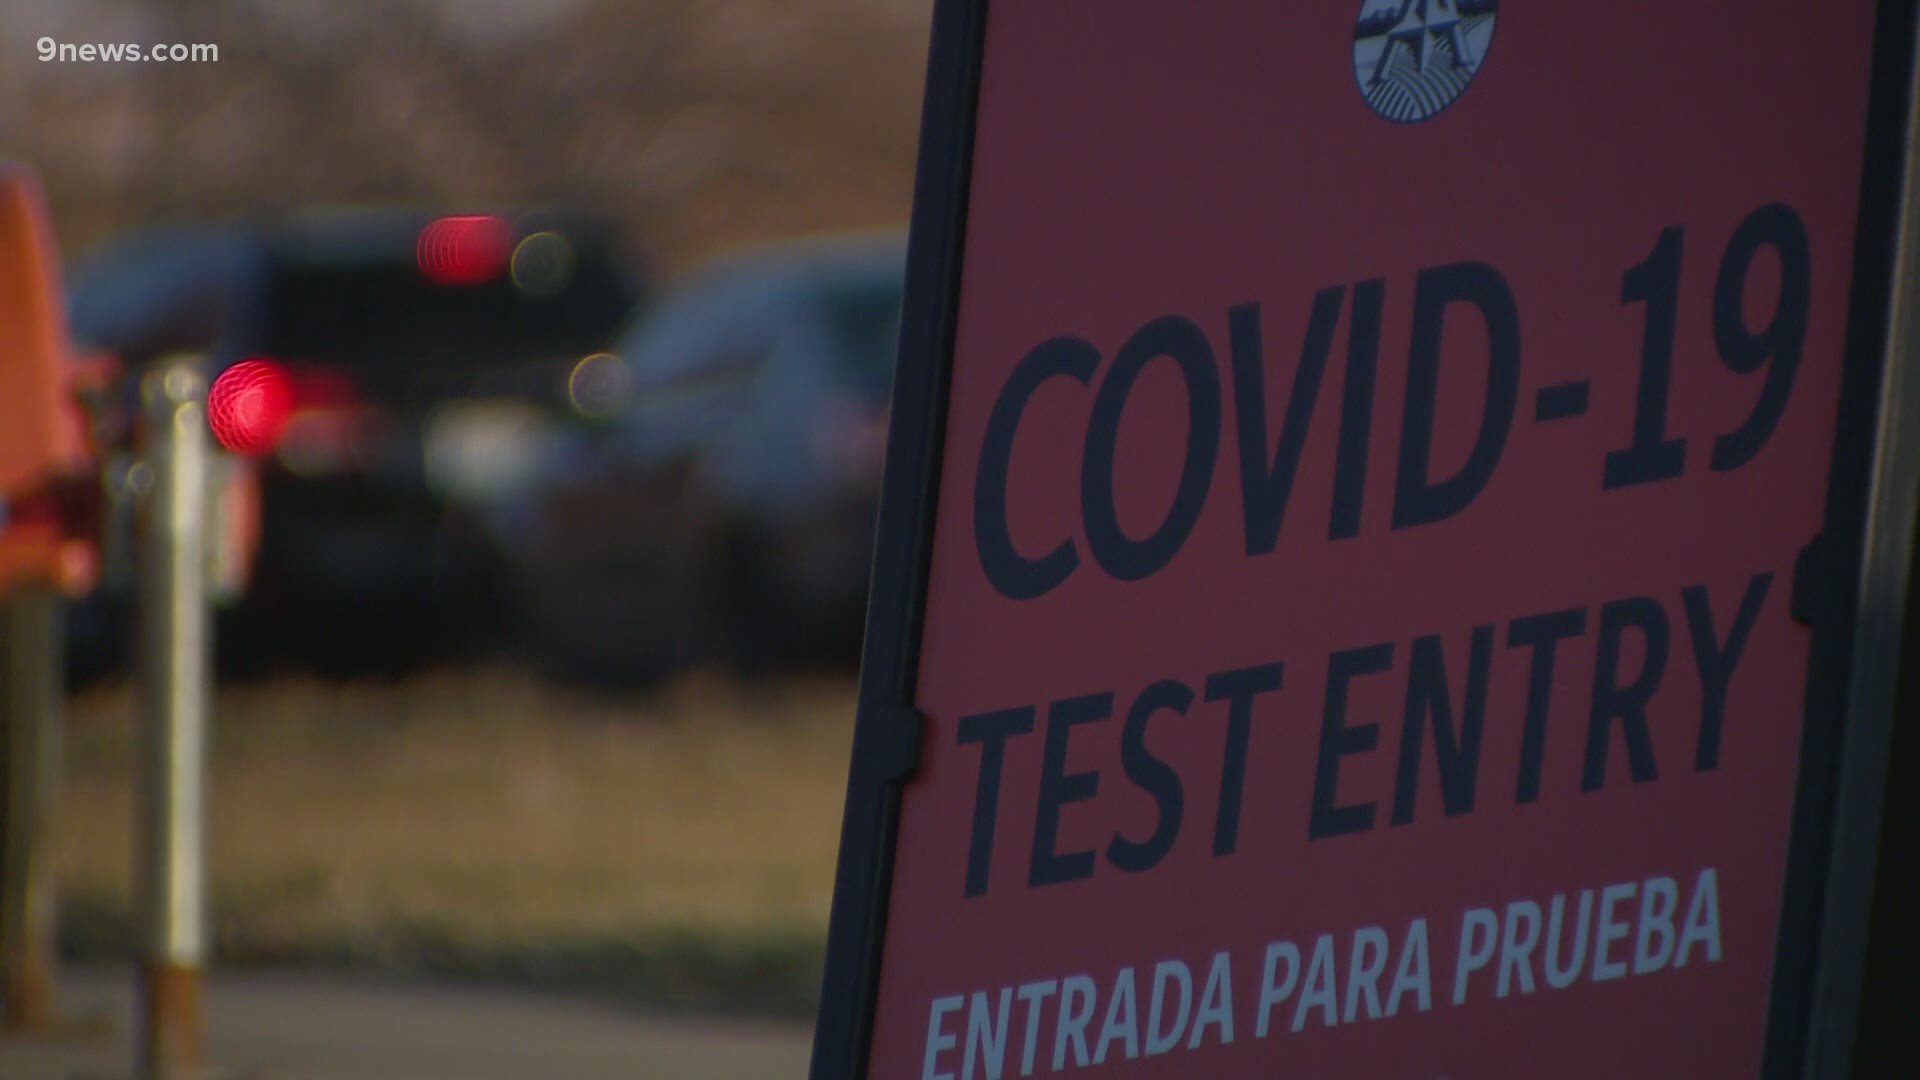 As we head into a holiday week in the middle of a pandemic, health experts are warning that getting tested isn’t enough to guarantee your safety.